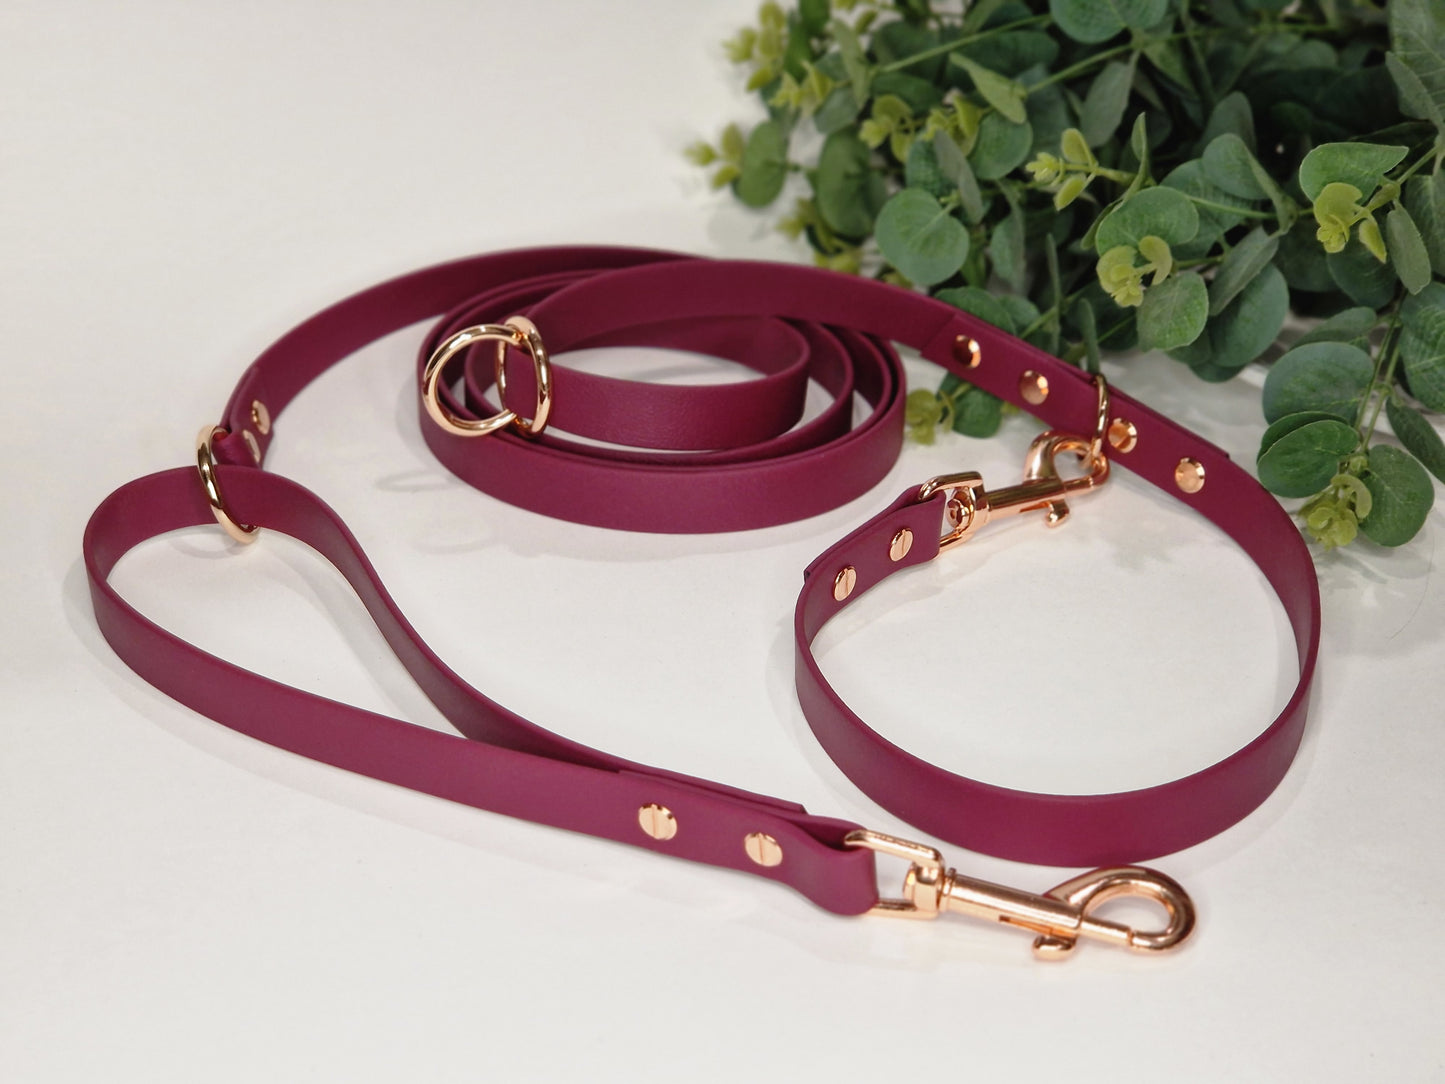 Wine-Colored Biothane Multifunctional Dog Leash with Copper Carabiners, thoughtfully arranged on a background of lush greenery for decoration.